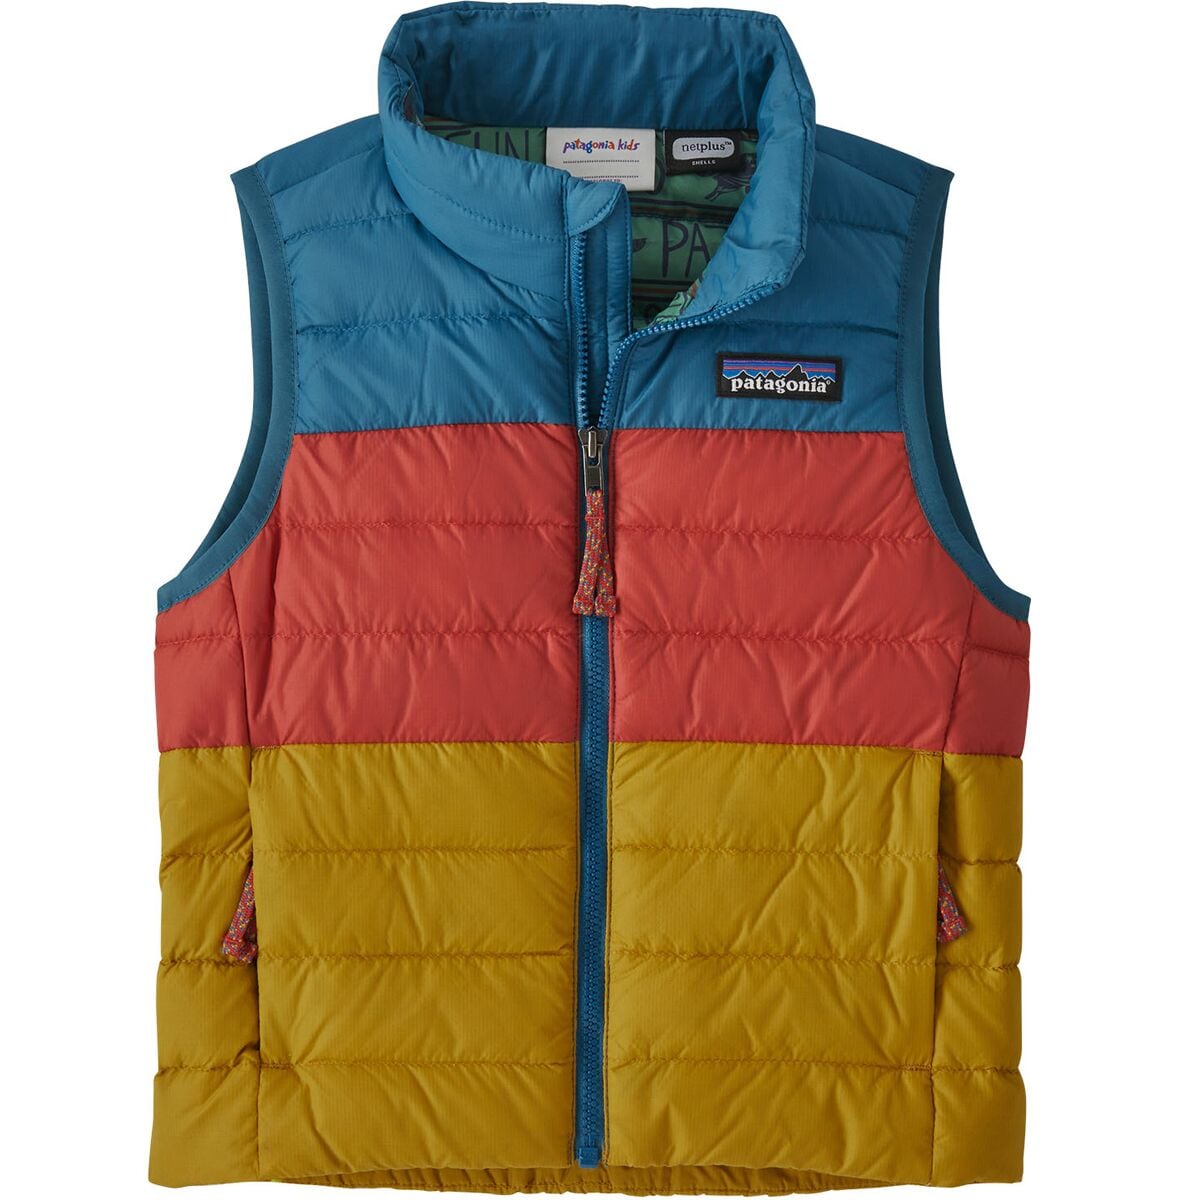 Patagonia Down Sweater Vest - Toddlers'